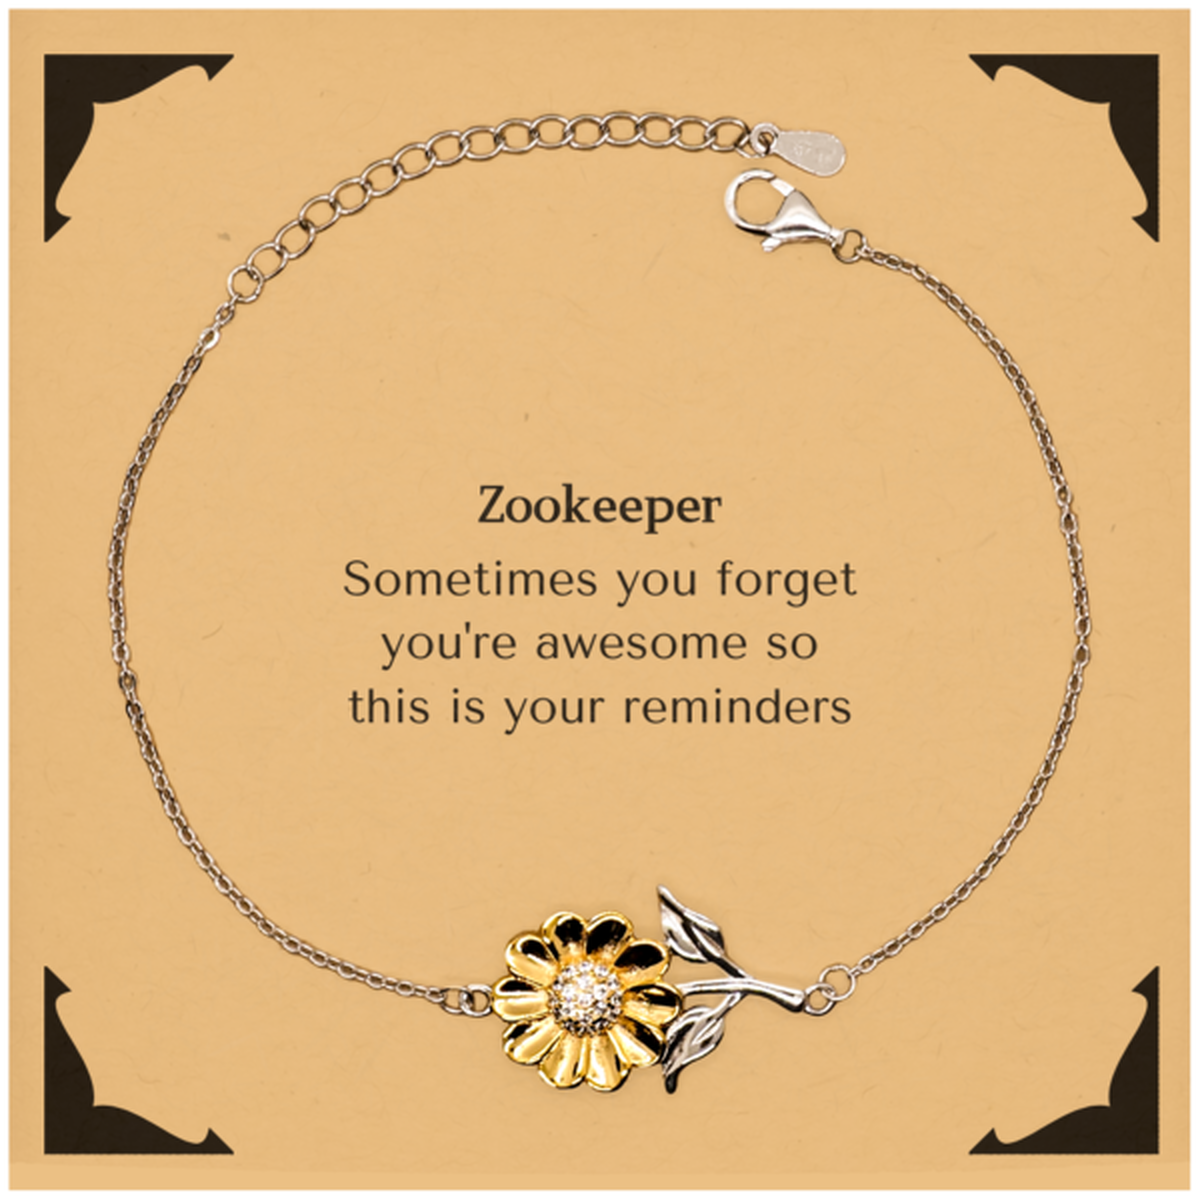 Sentimental Zookeeper Sunflower Bracelet, Zookeeper Sometimes you forget you're awesome so this is your reminders, Graduation Christmas Birthday Gifts for Zookeeper, Men, Women, Coworkers